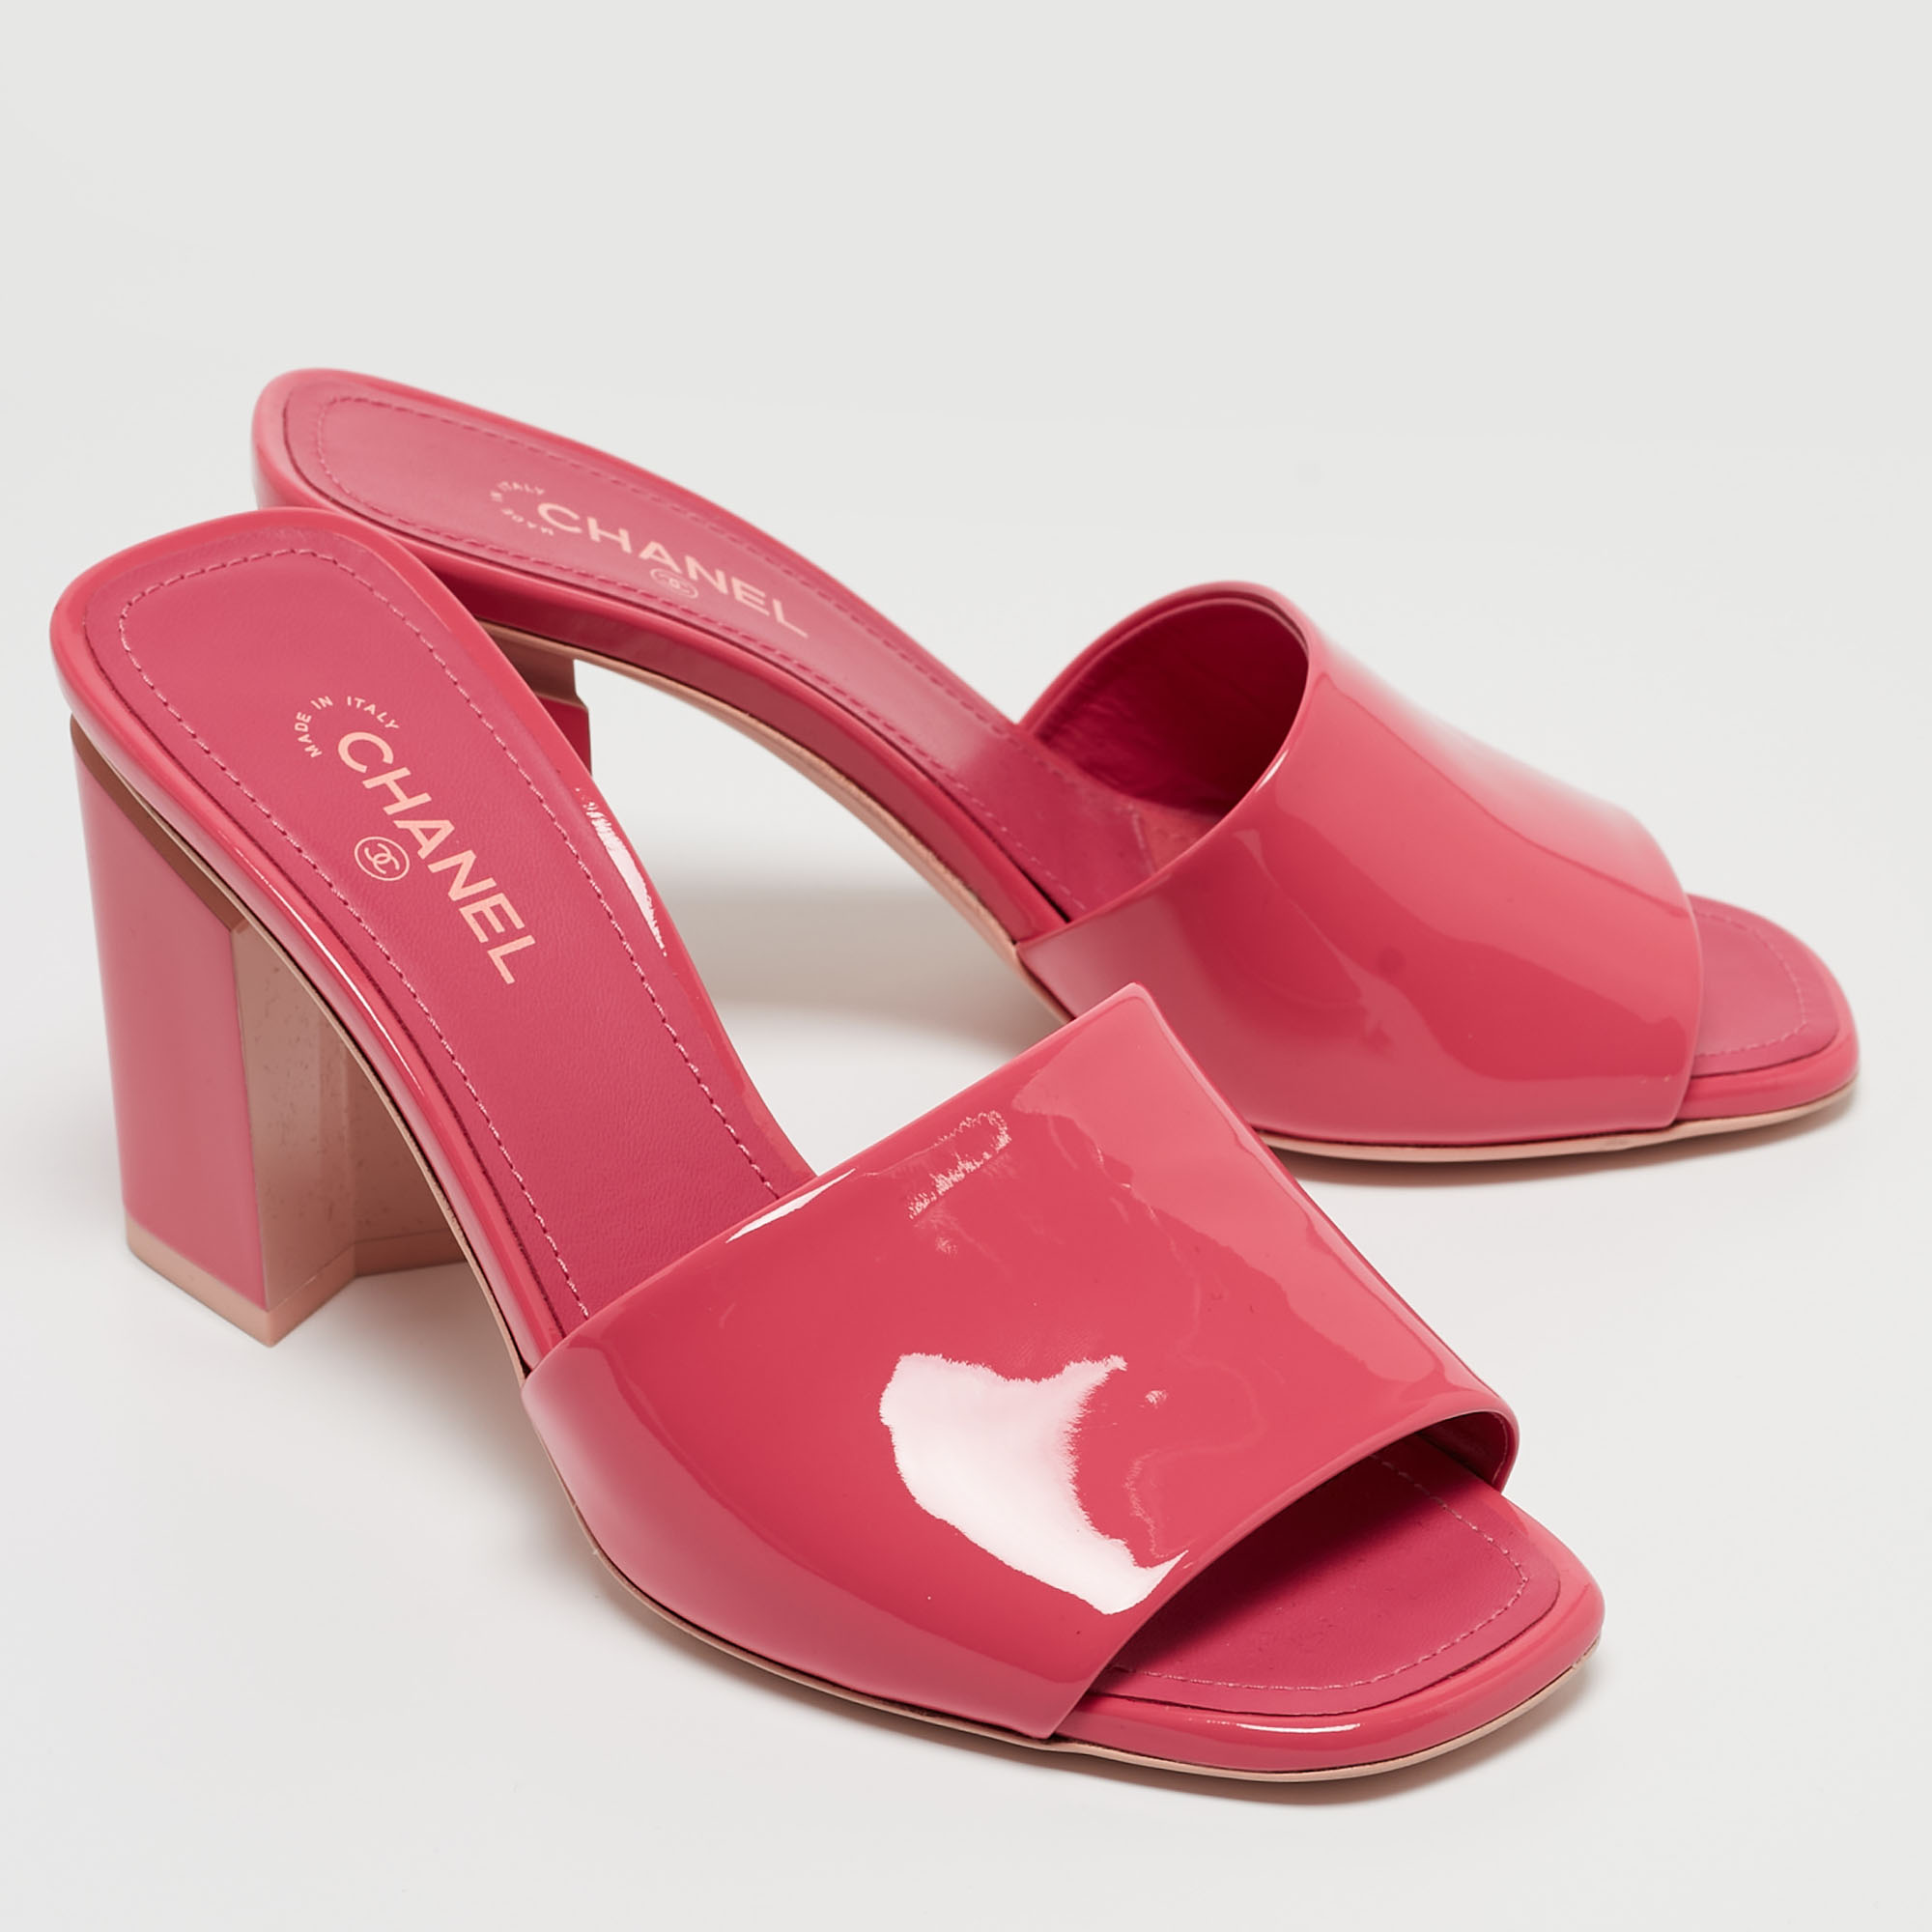 Chanel Pink Patent Leather CC Slide Sandals Size 36